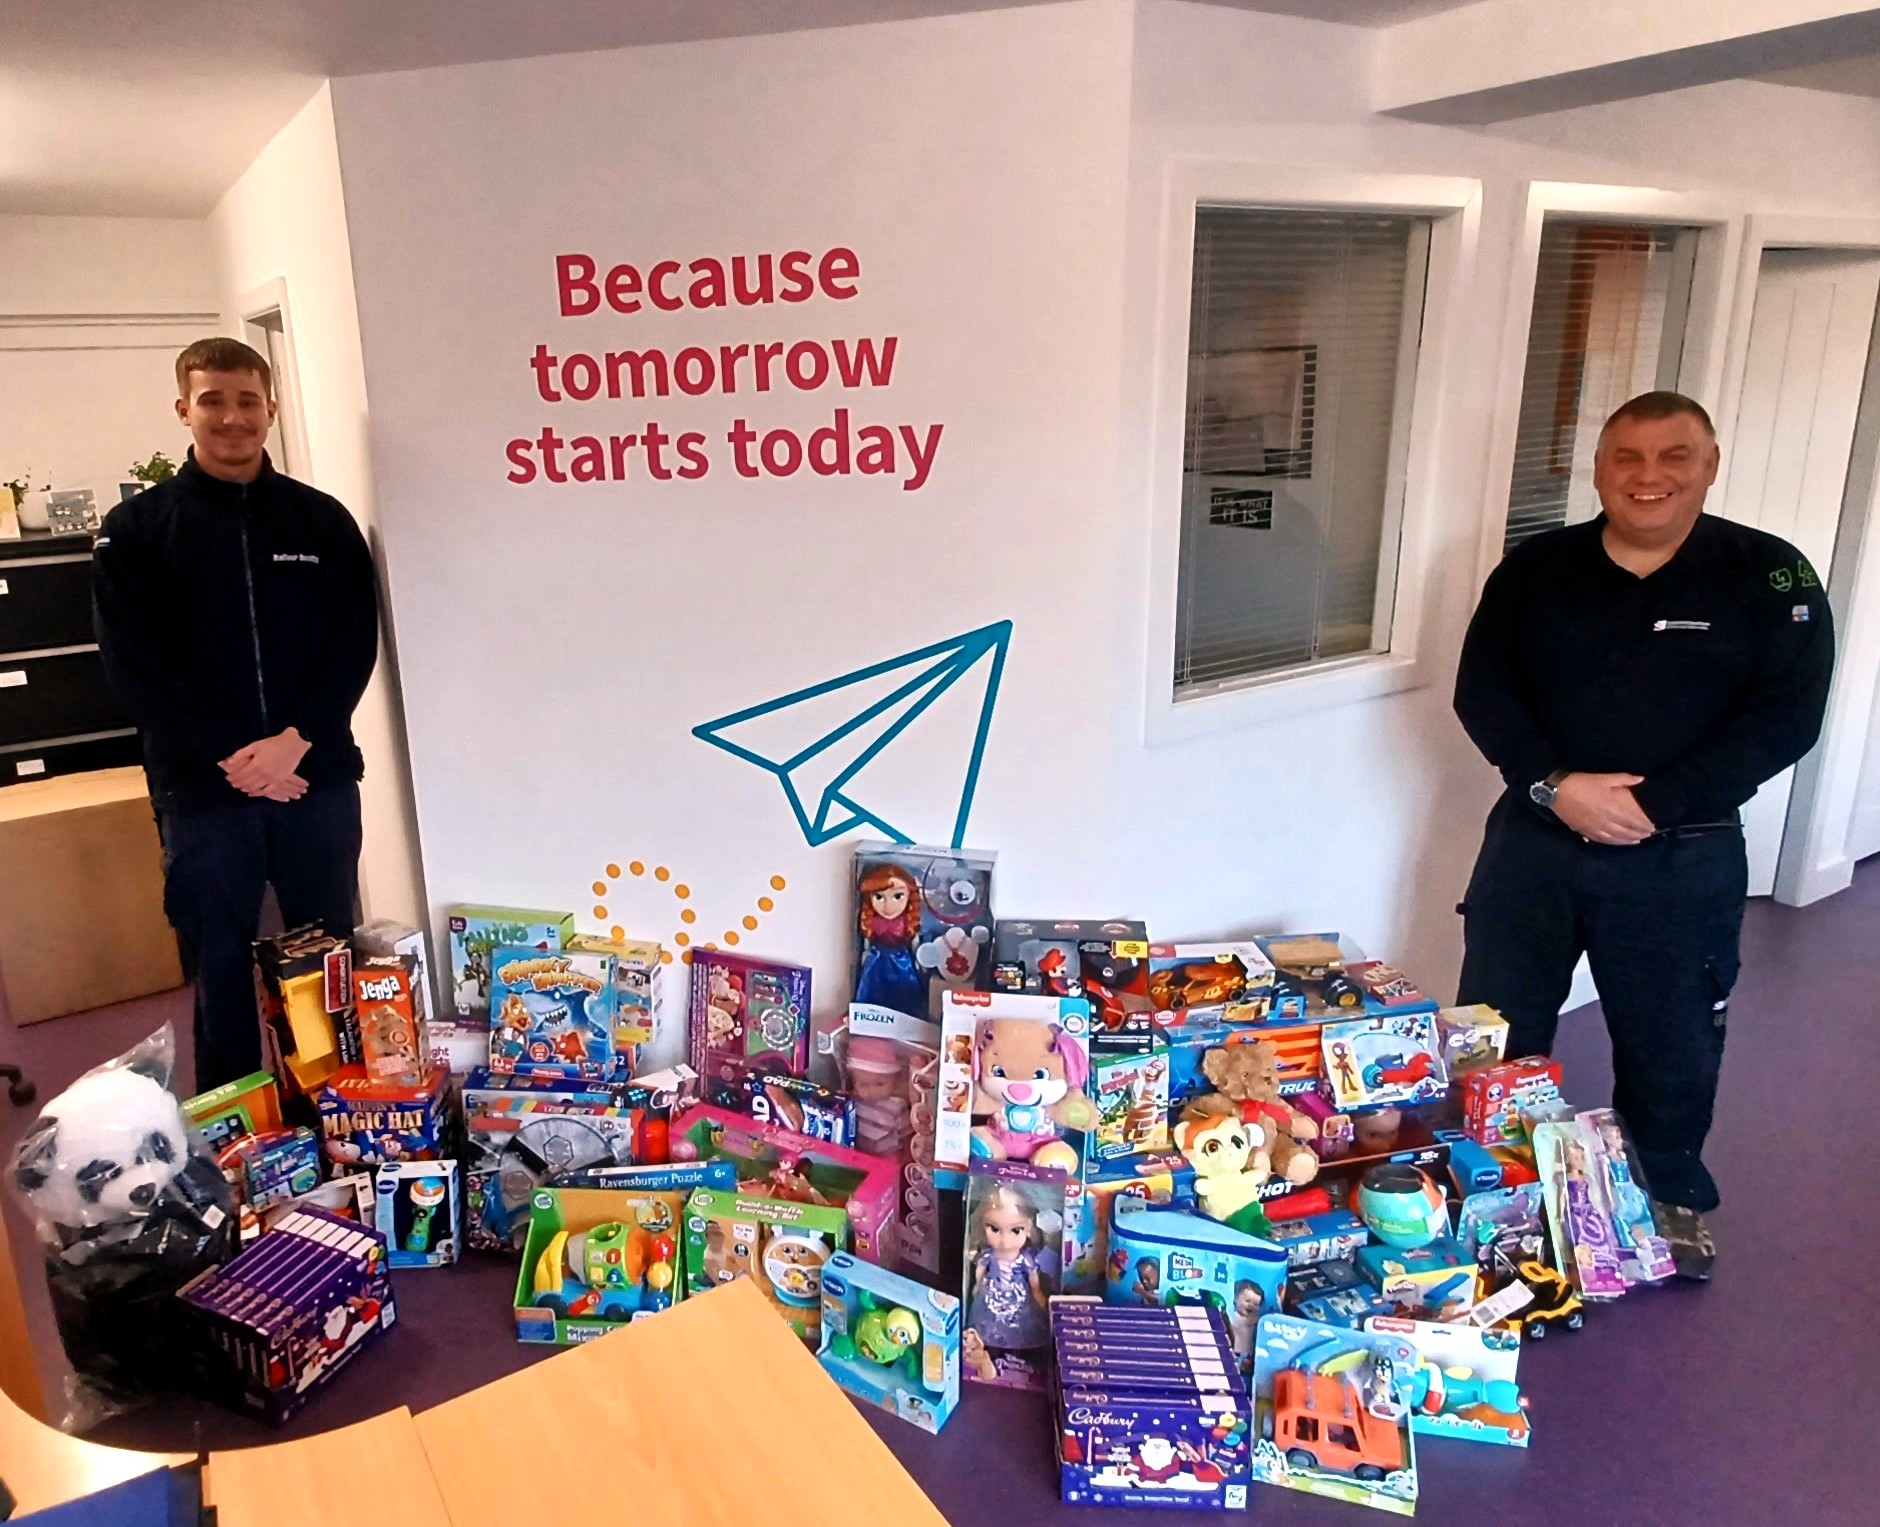 SSEN transmission employees with a pile of chocolate and toys.